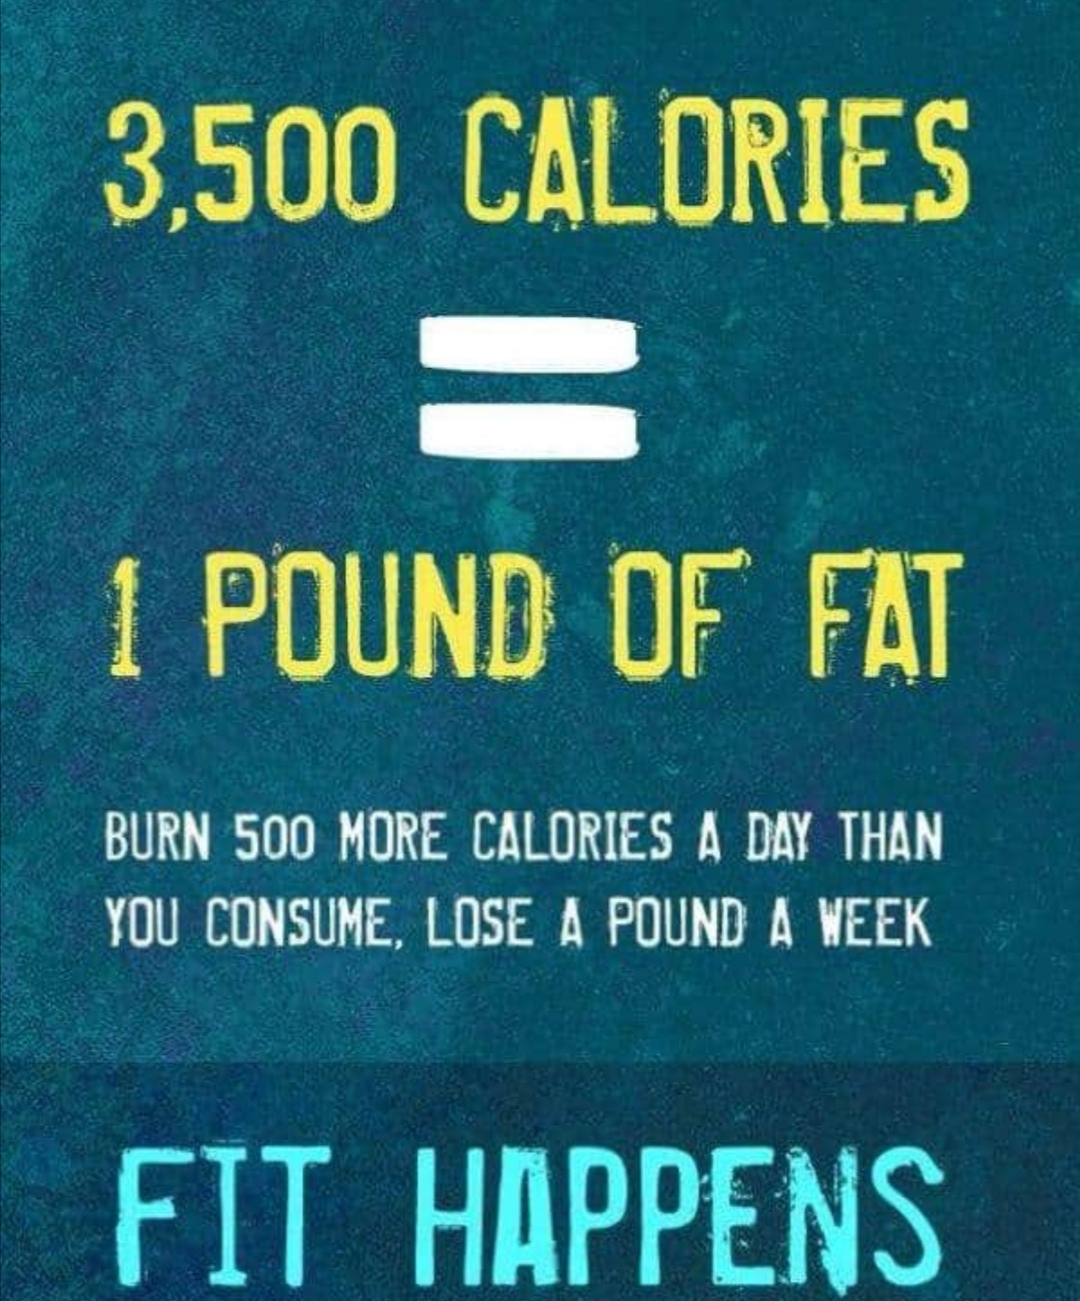 weight loss motivational quotes